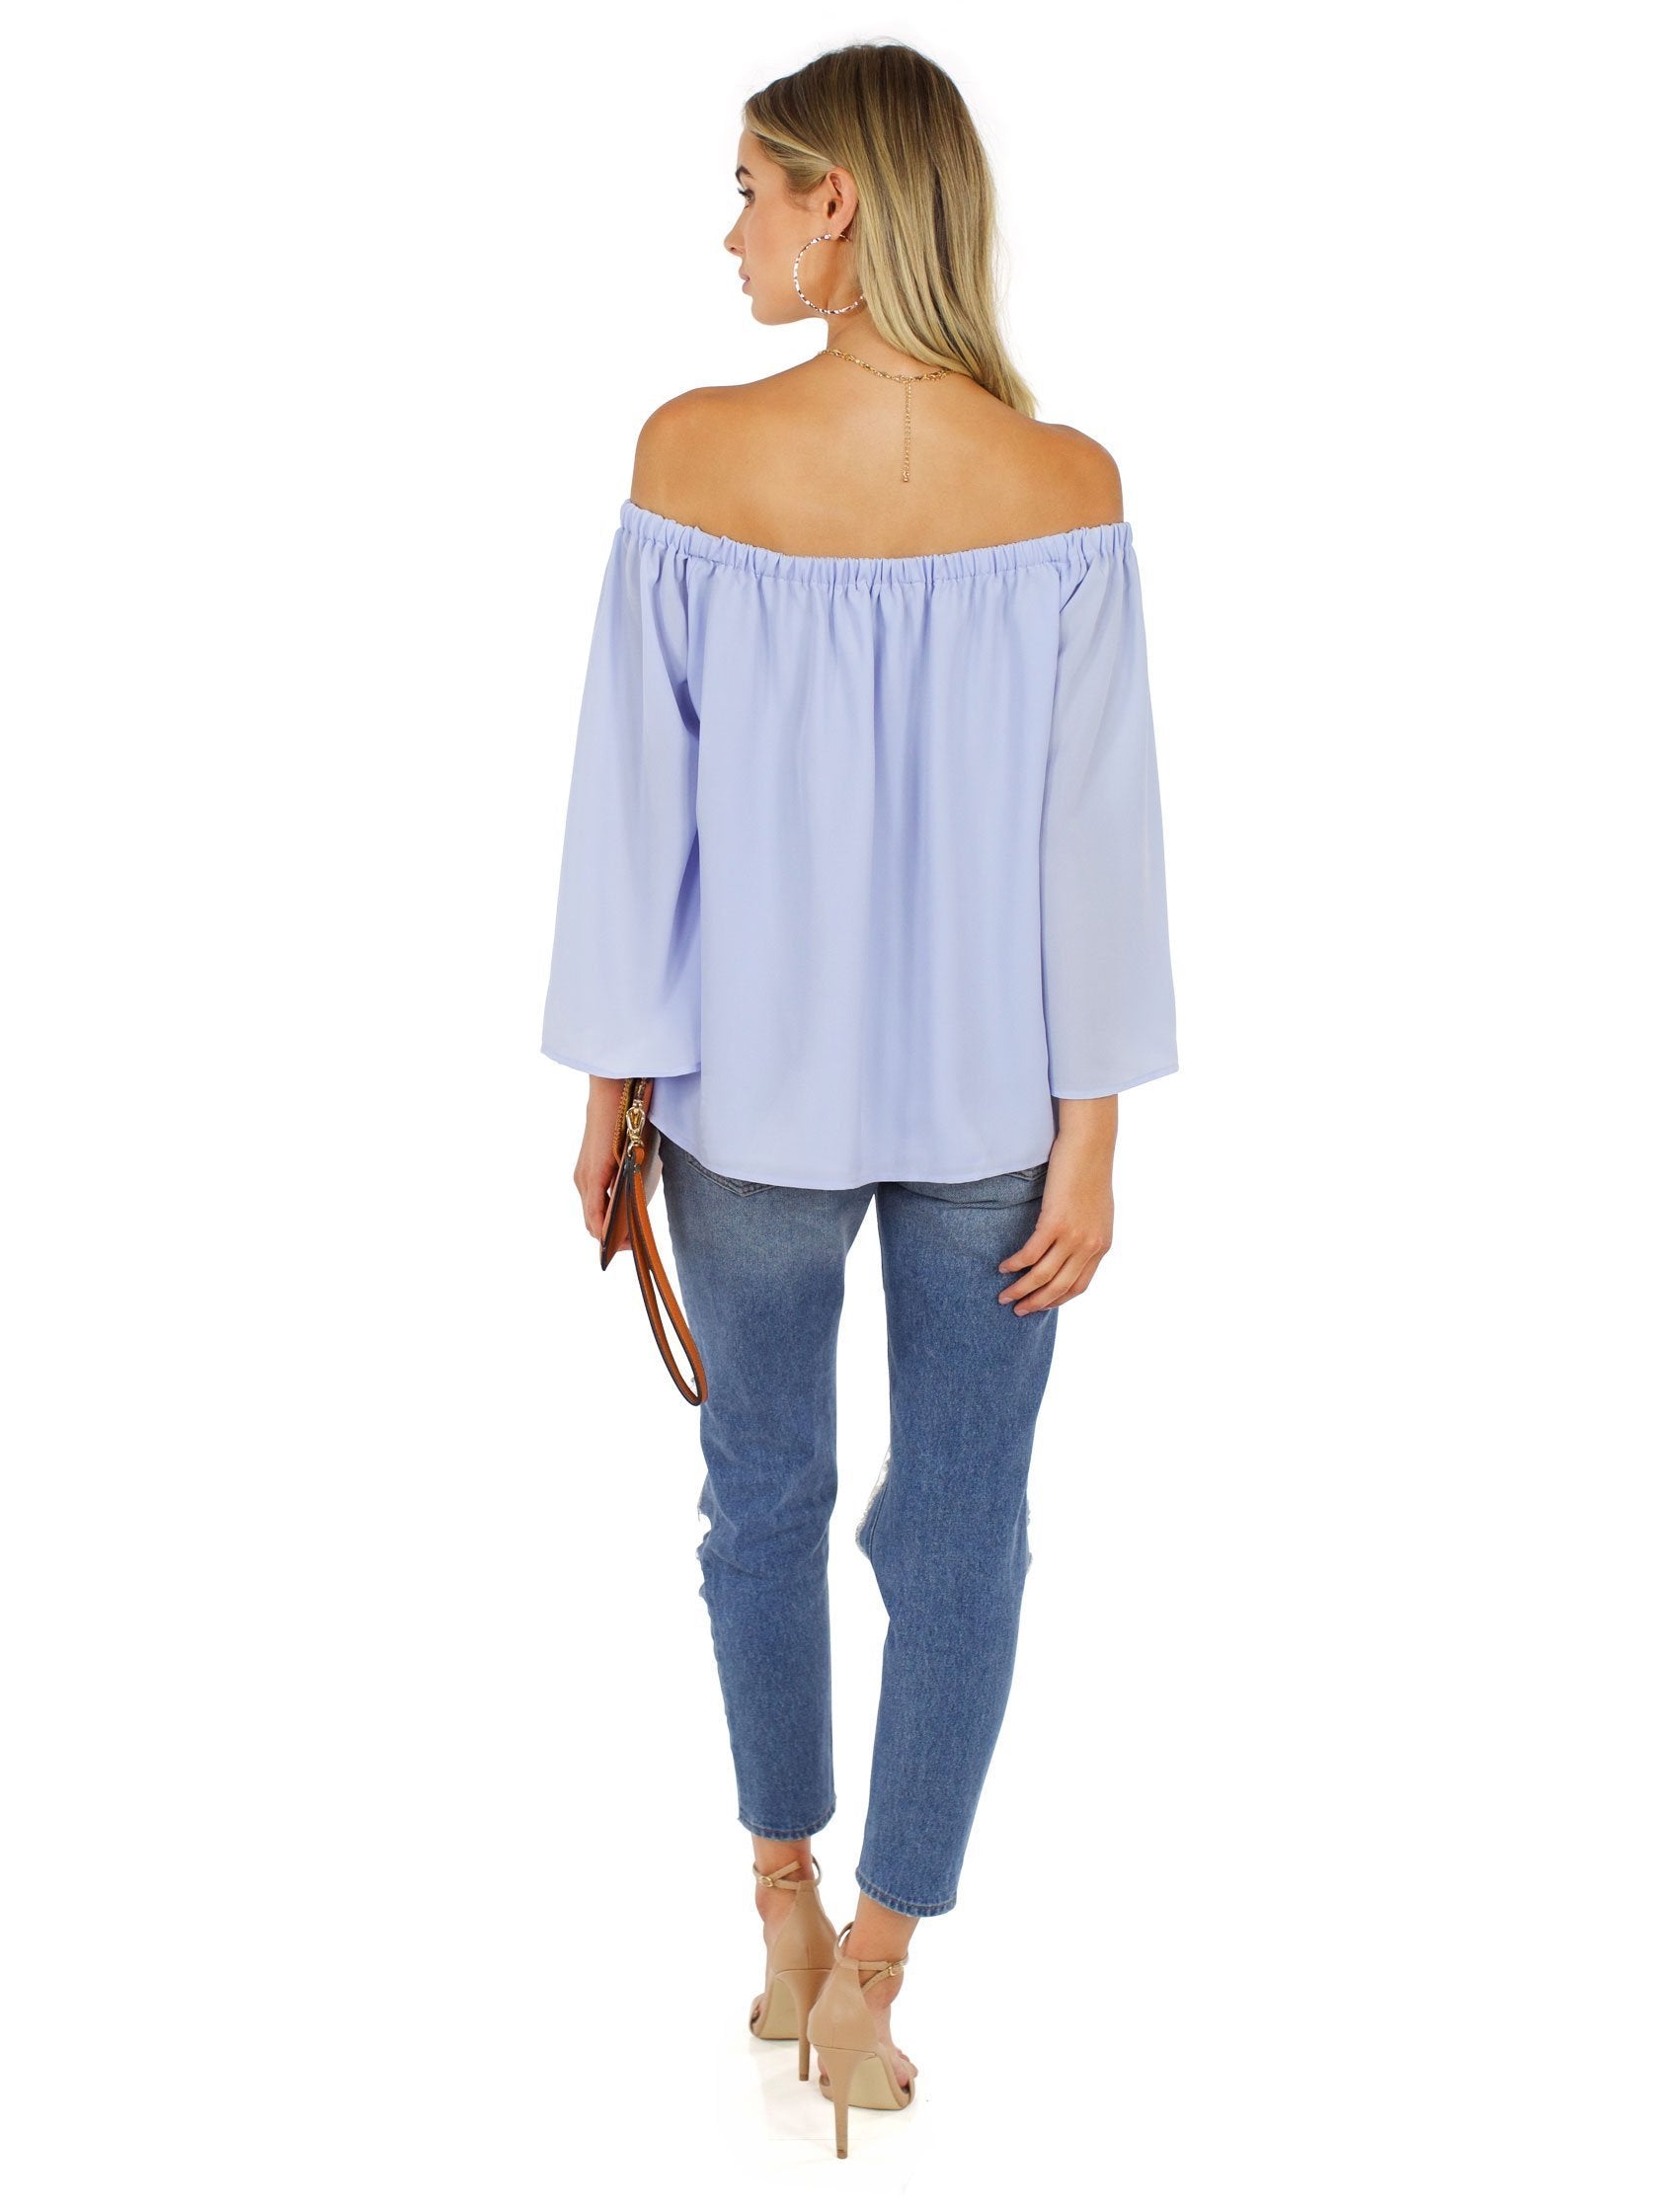 Women wearing a top rental from French Connection called Off Shoulder Top